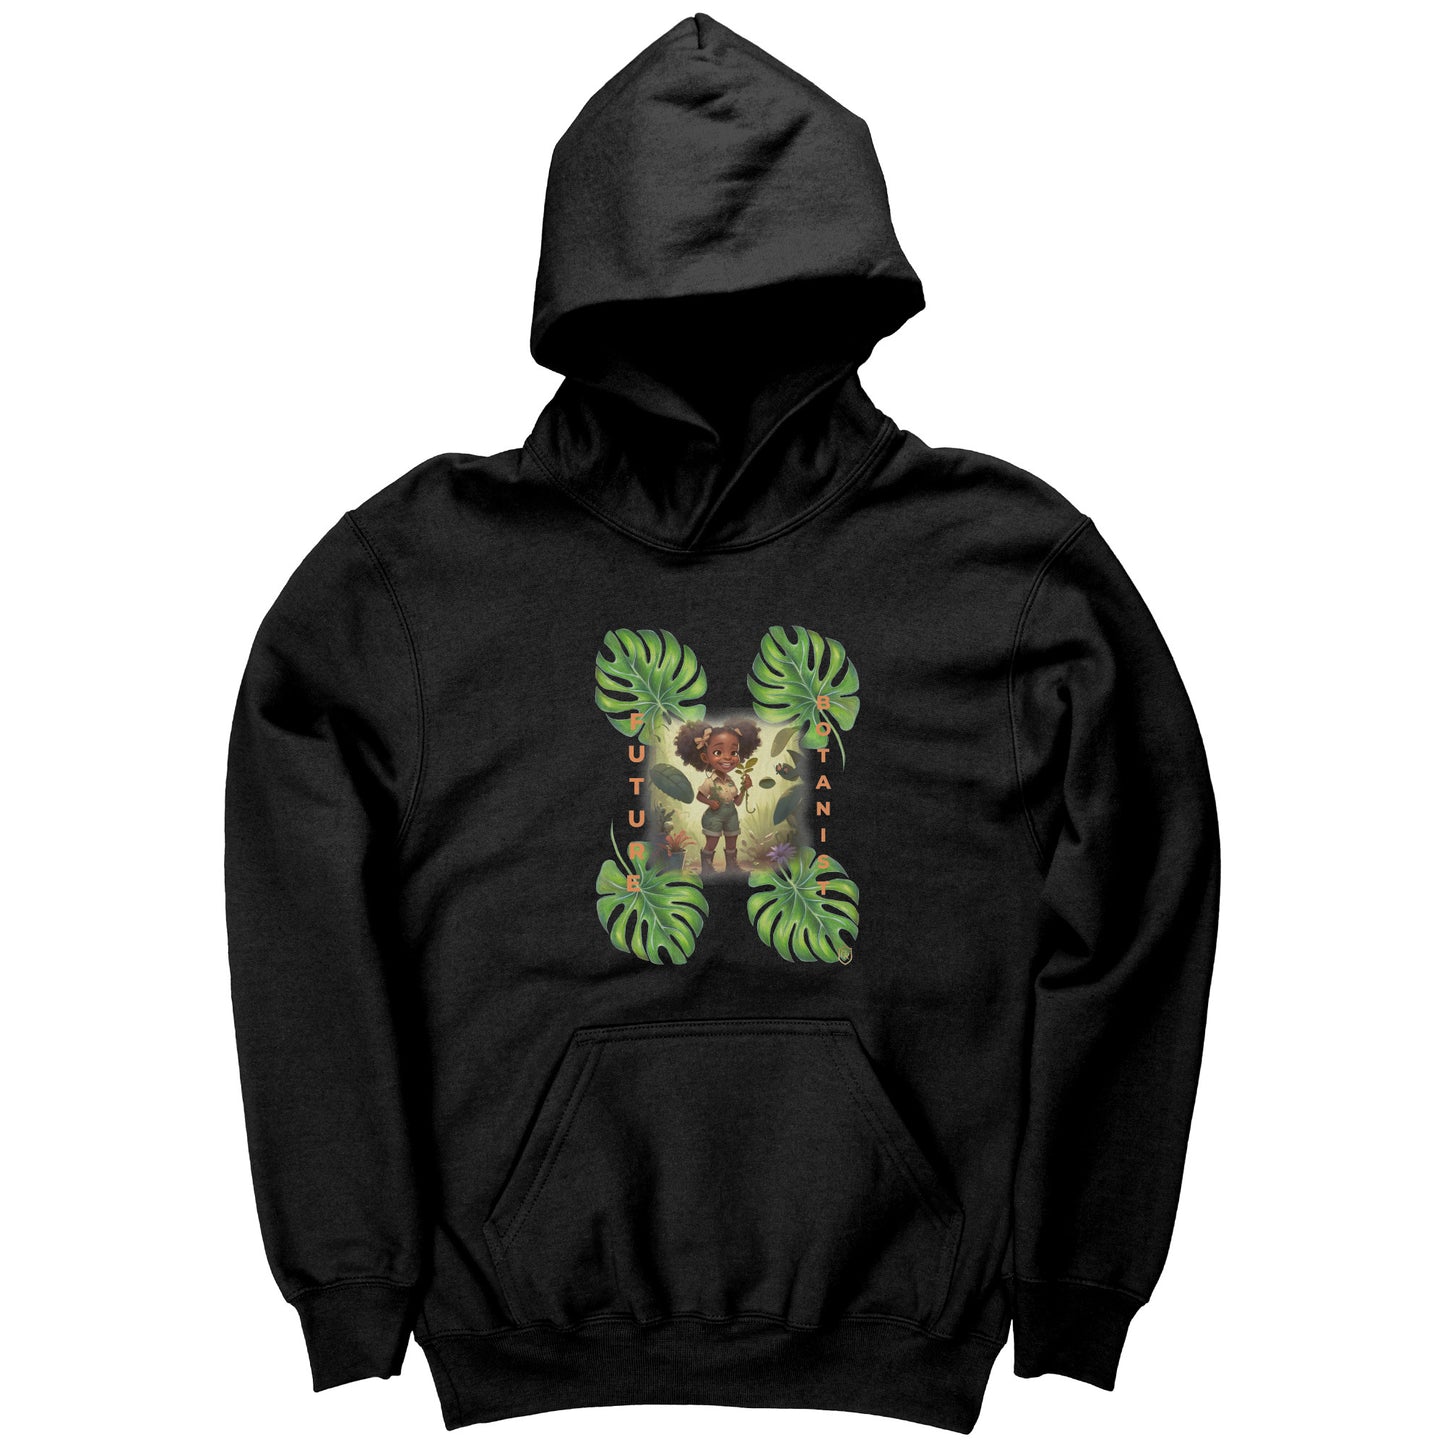 Young Girl's Botanist of the Future Hoodie